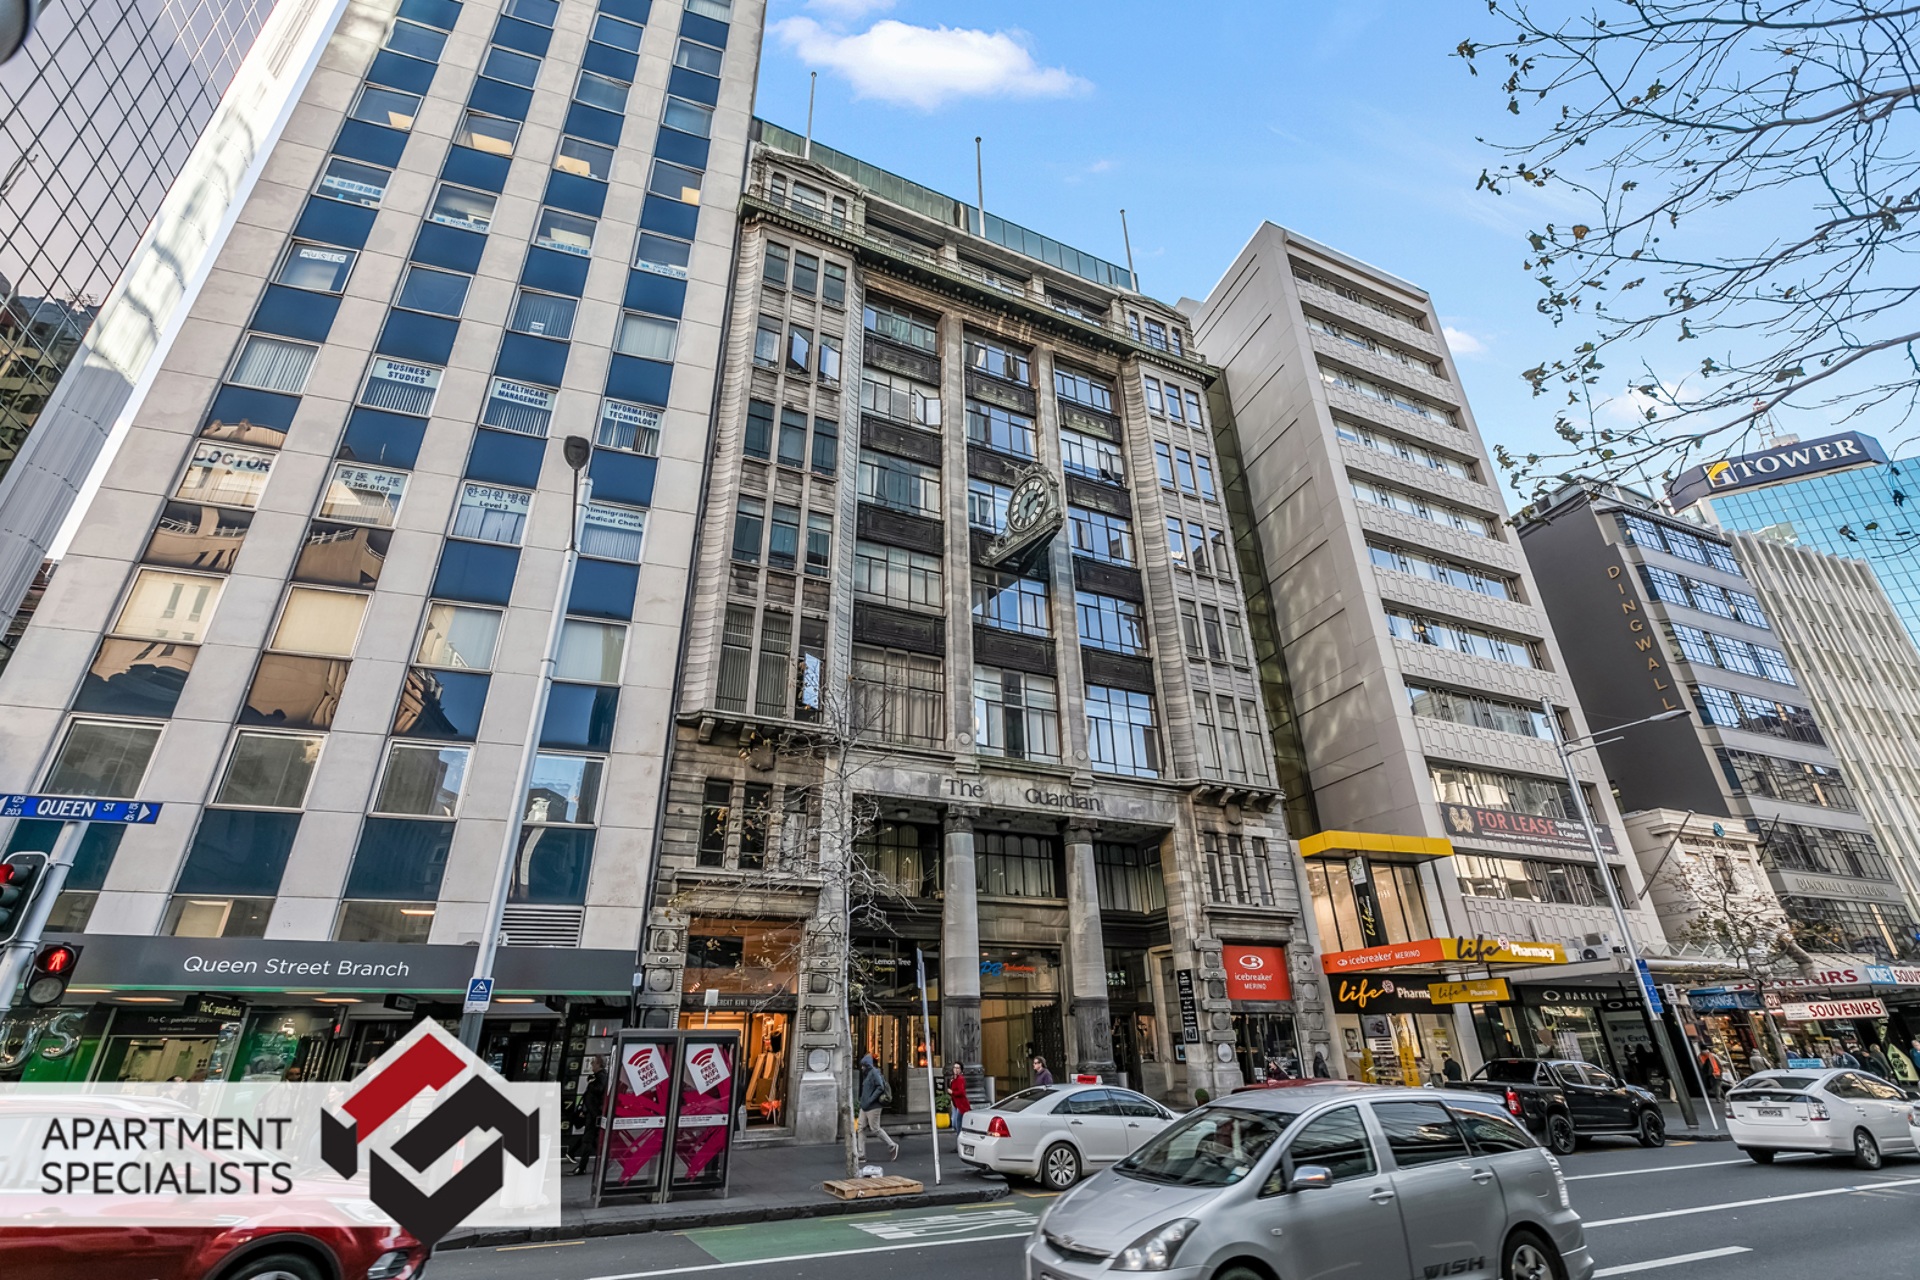 12 | 105 Queen Street, City Centre | Apartment Specialists